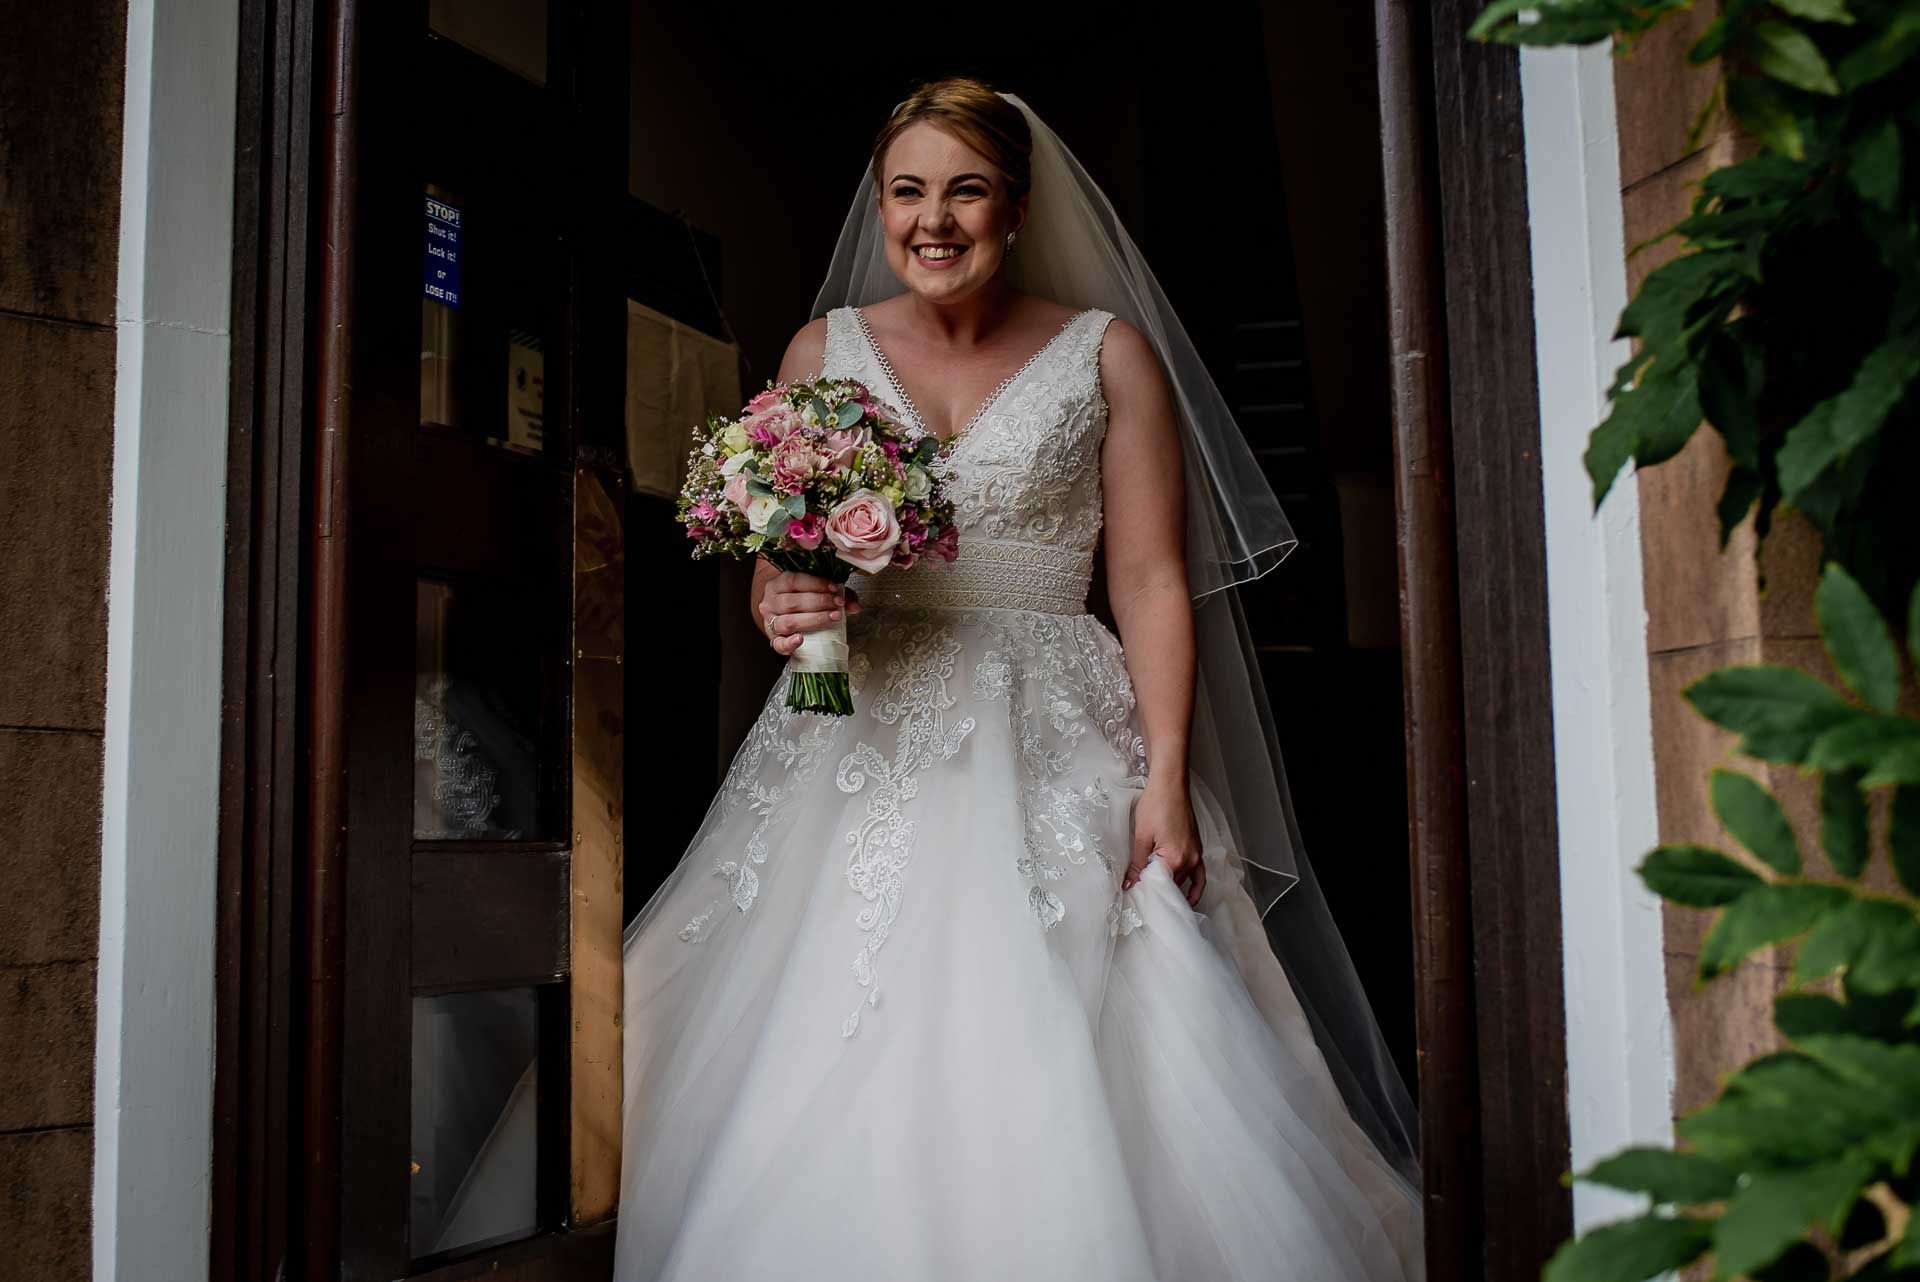 Leah walking through the door into the courtyard of Emmanuel College in her wedding dress and holding her bridal bouquet. Photography by Damien Vickers Photography.